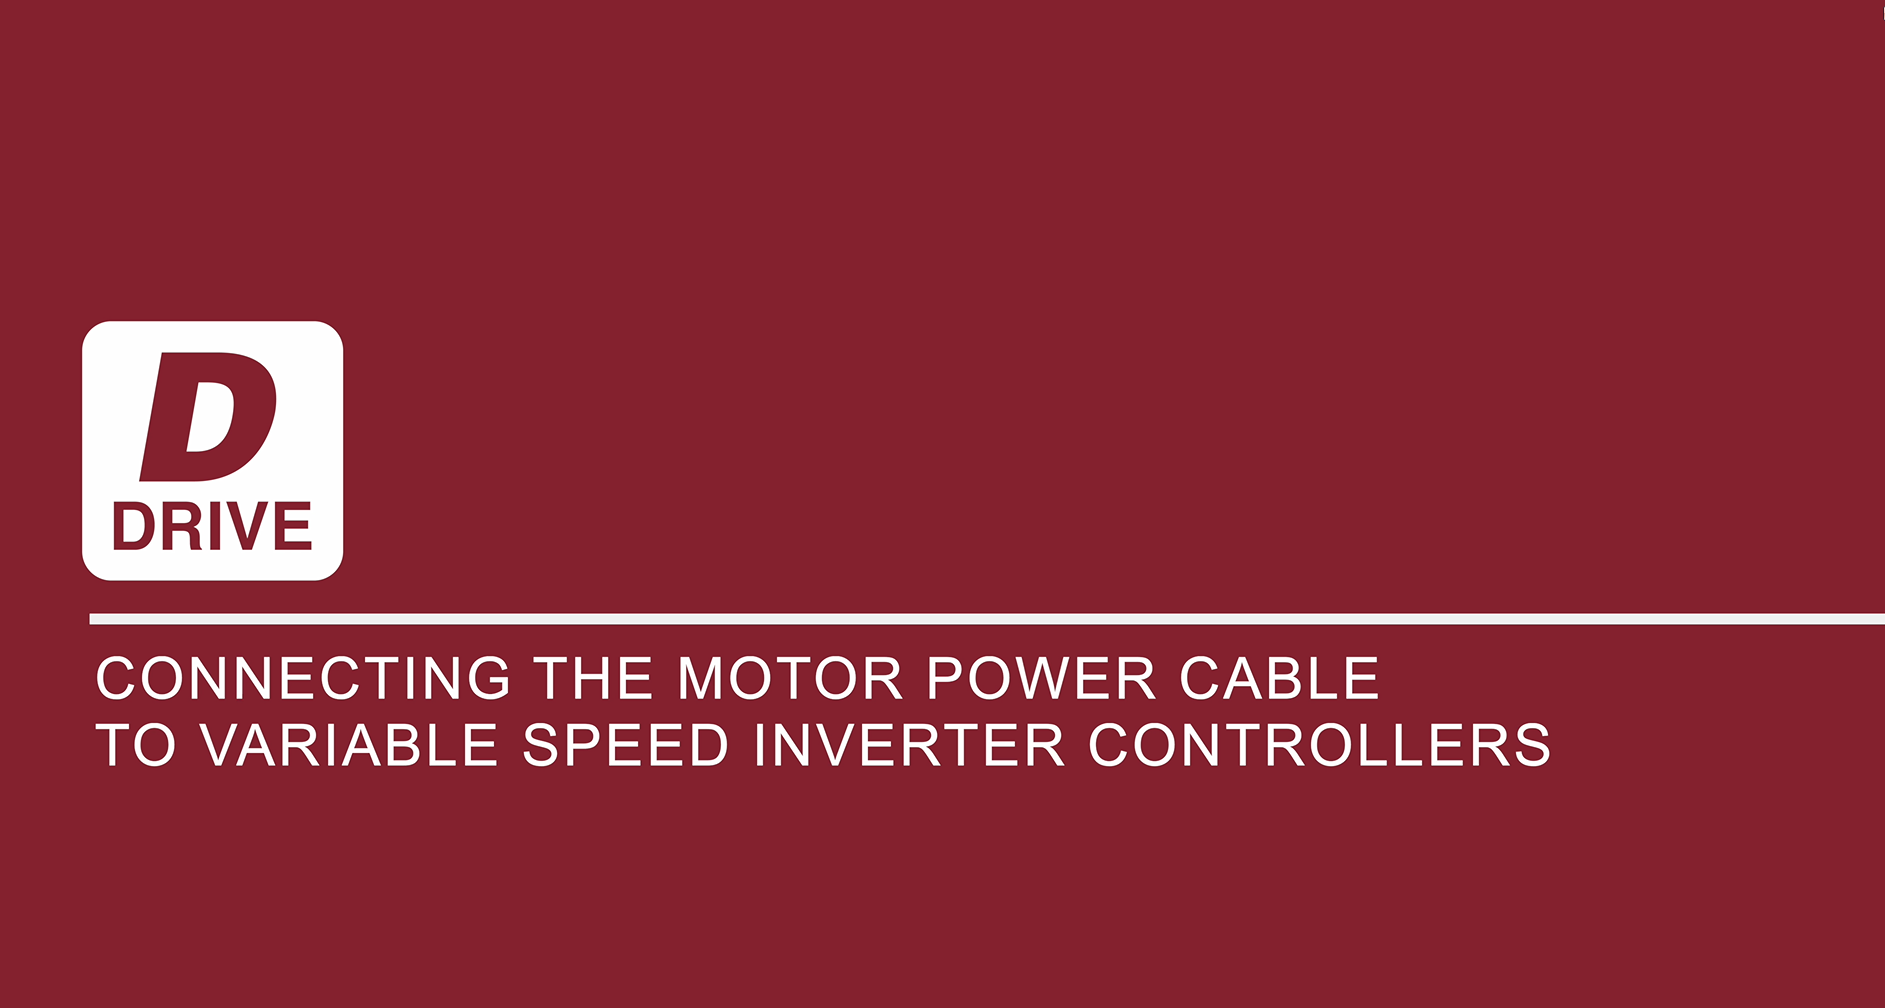 Connecting the motor power cable to variable speed inverter controllers